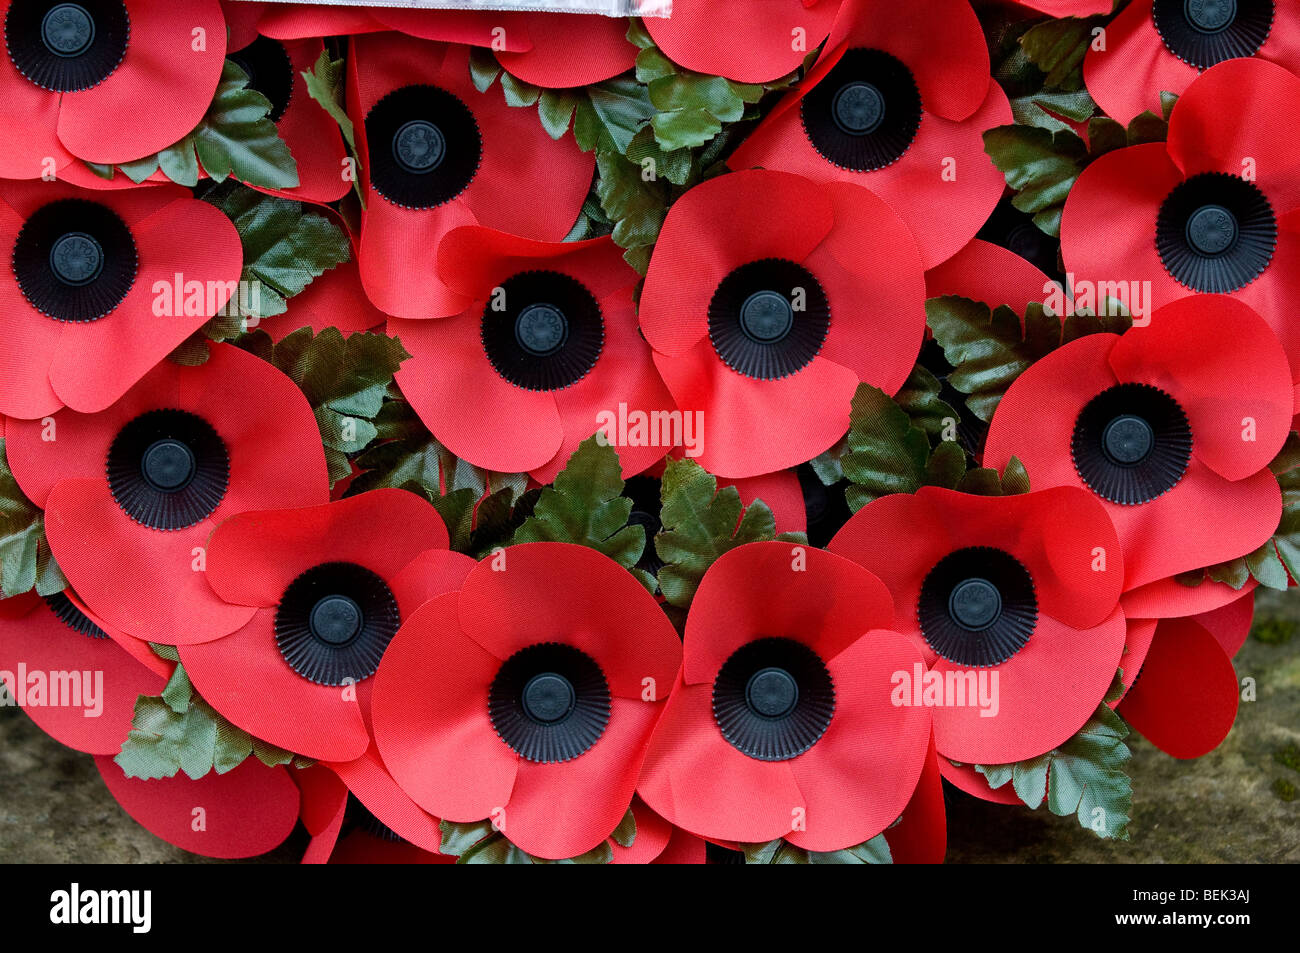 Wreaths, and crosses at Royal British Legion armistice day parade which is an annual event in the UK. Stock Photo